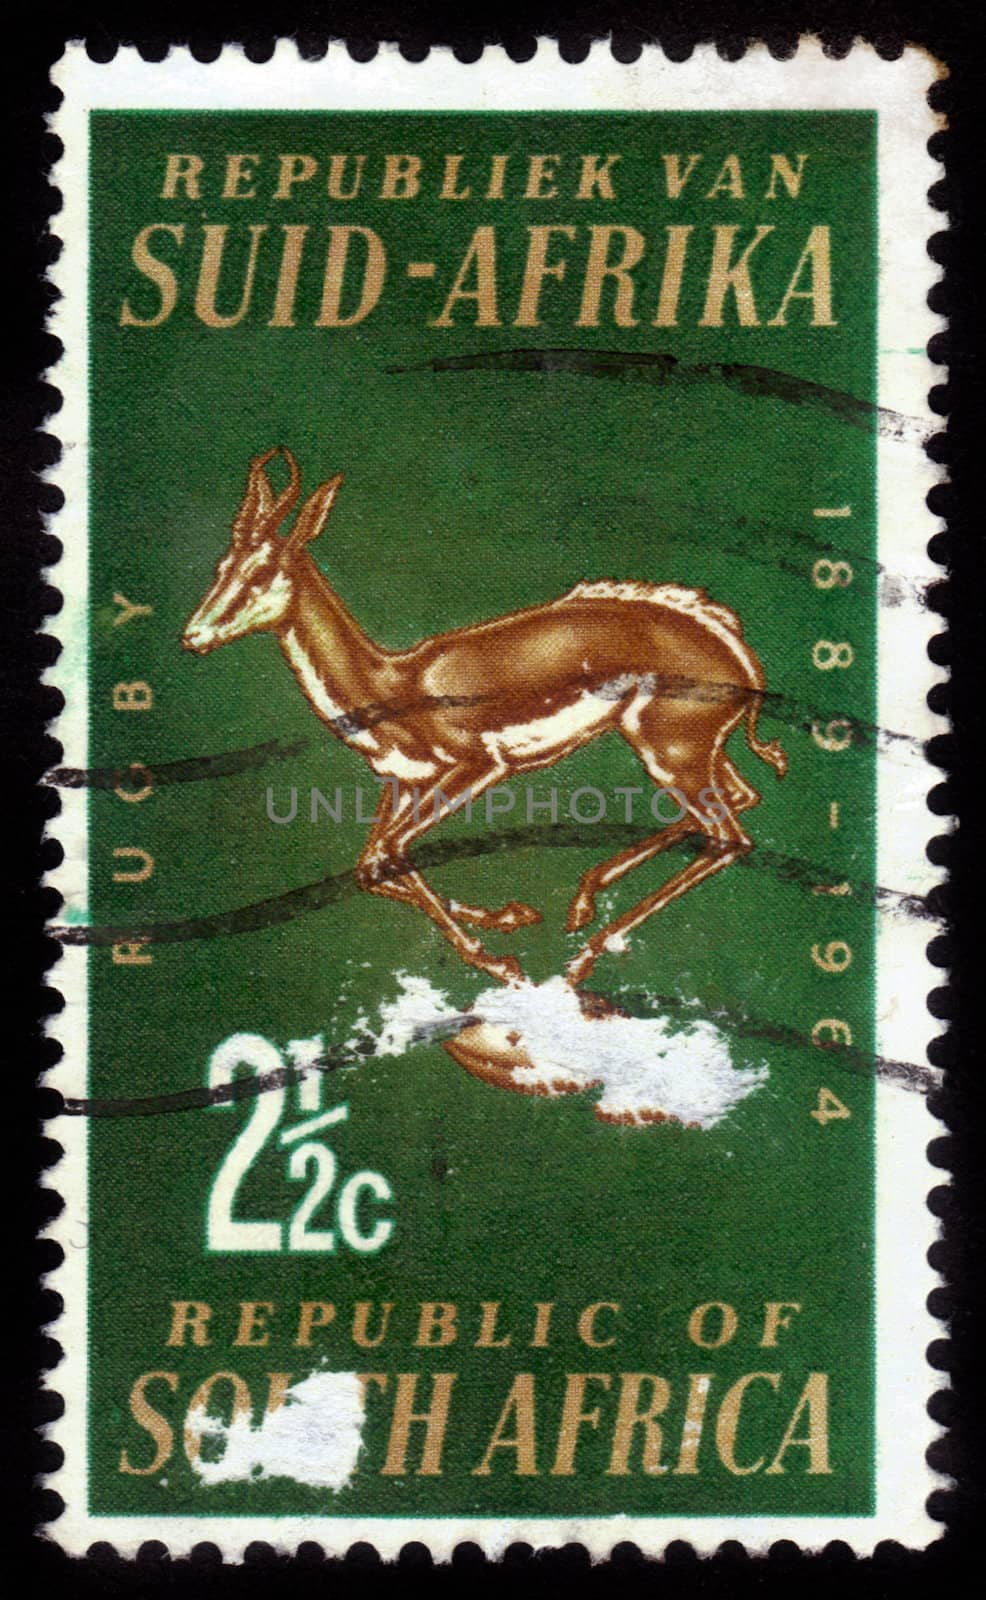 SOUTH AFRICA - CIRCA 1964: A stamp printed in South Africa shows antelope and rugby ball, dedicated to the 75th anniversary of the Rugby Cup, circa 1964